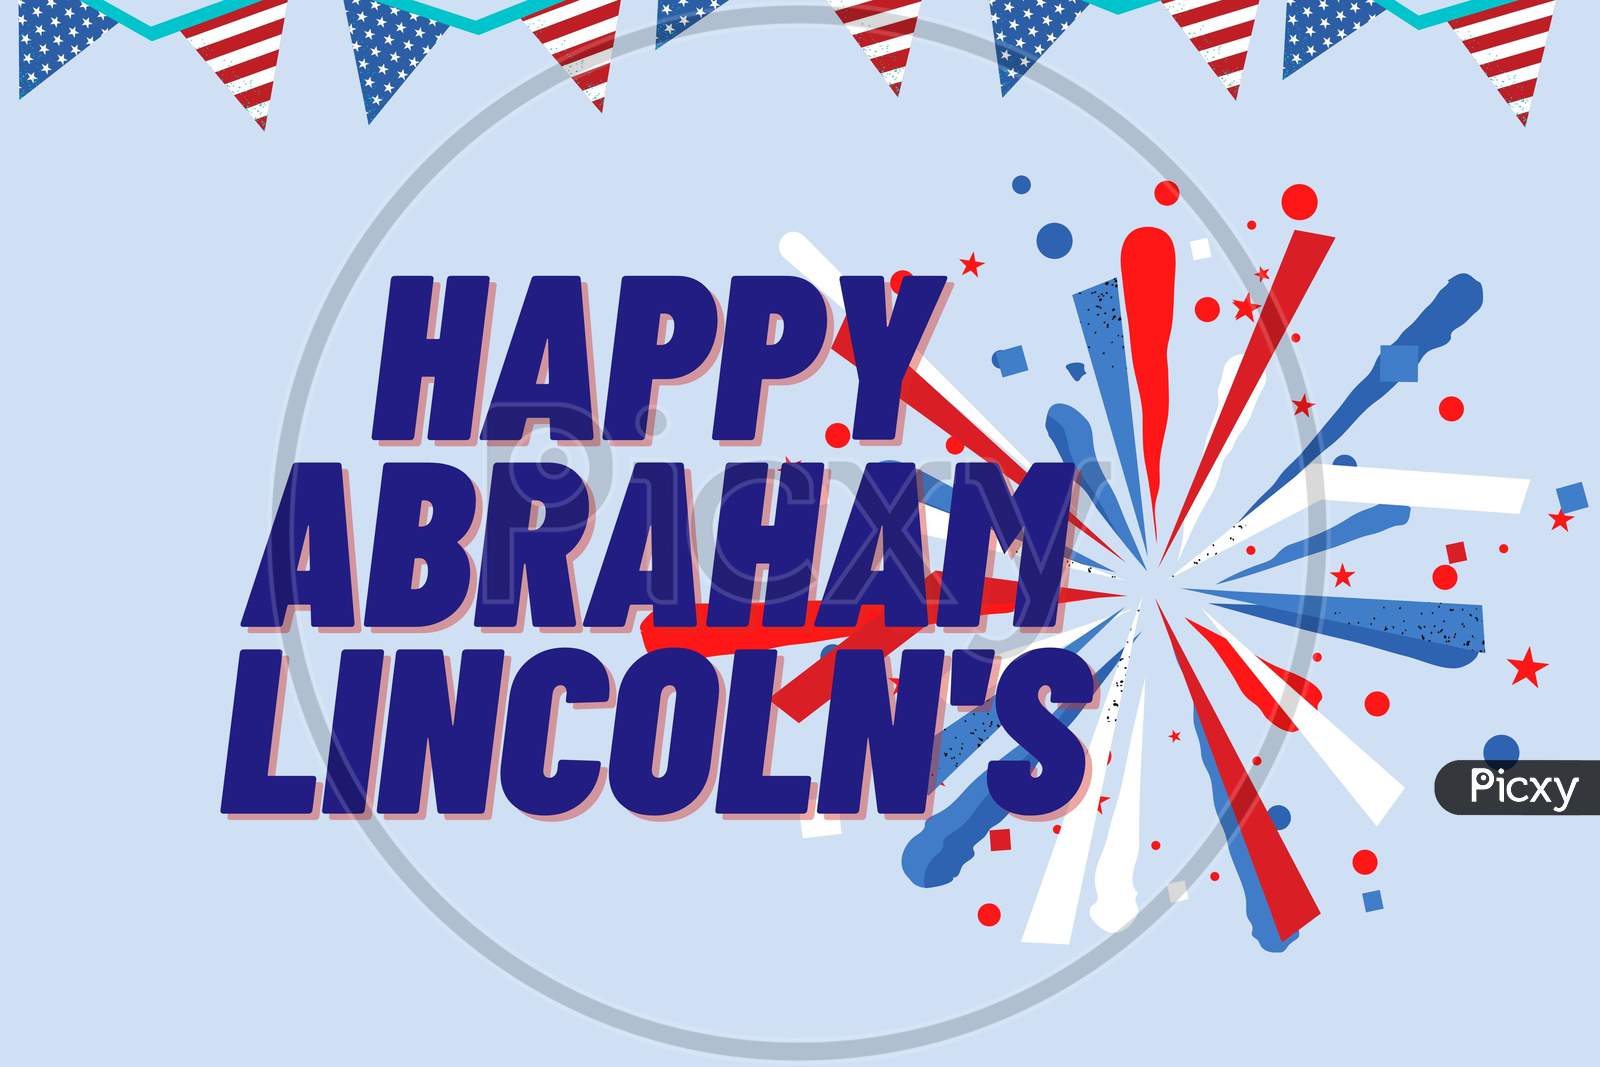 Abraham Lincoln’S Birthday Text With Elements Isolated On Sky Blue Background